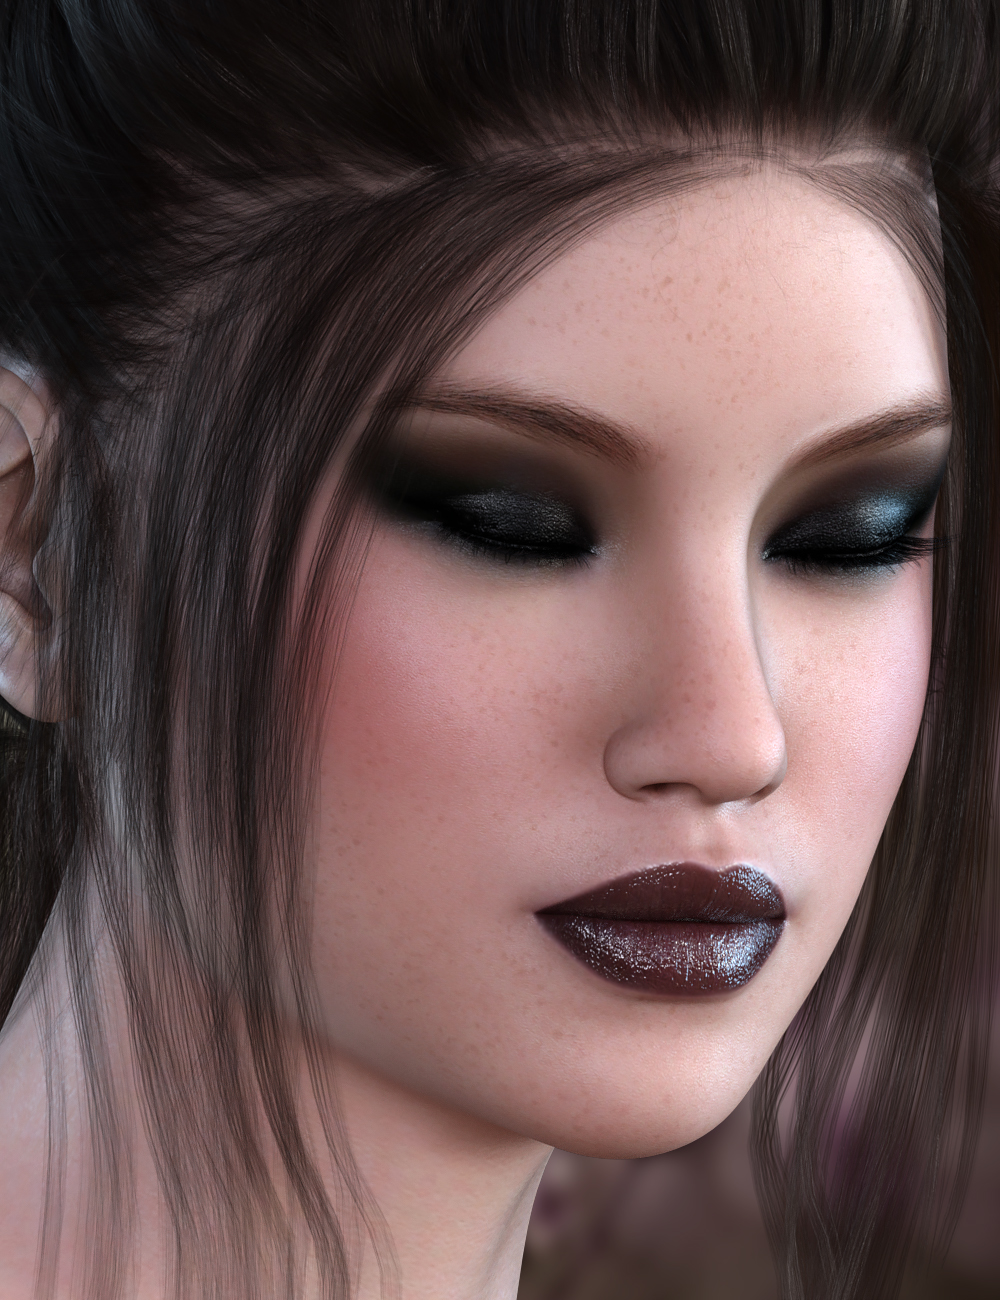 Emma Claire for Ophelia 7 & Genesis 3 Female by: 3DSublimeProductions, 3D Models by Daz 3D